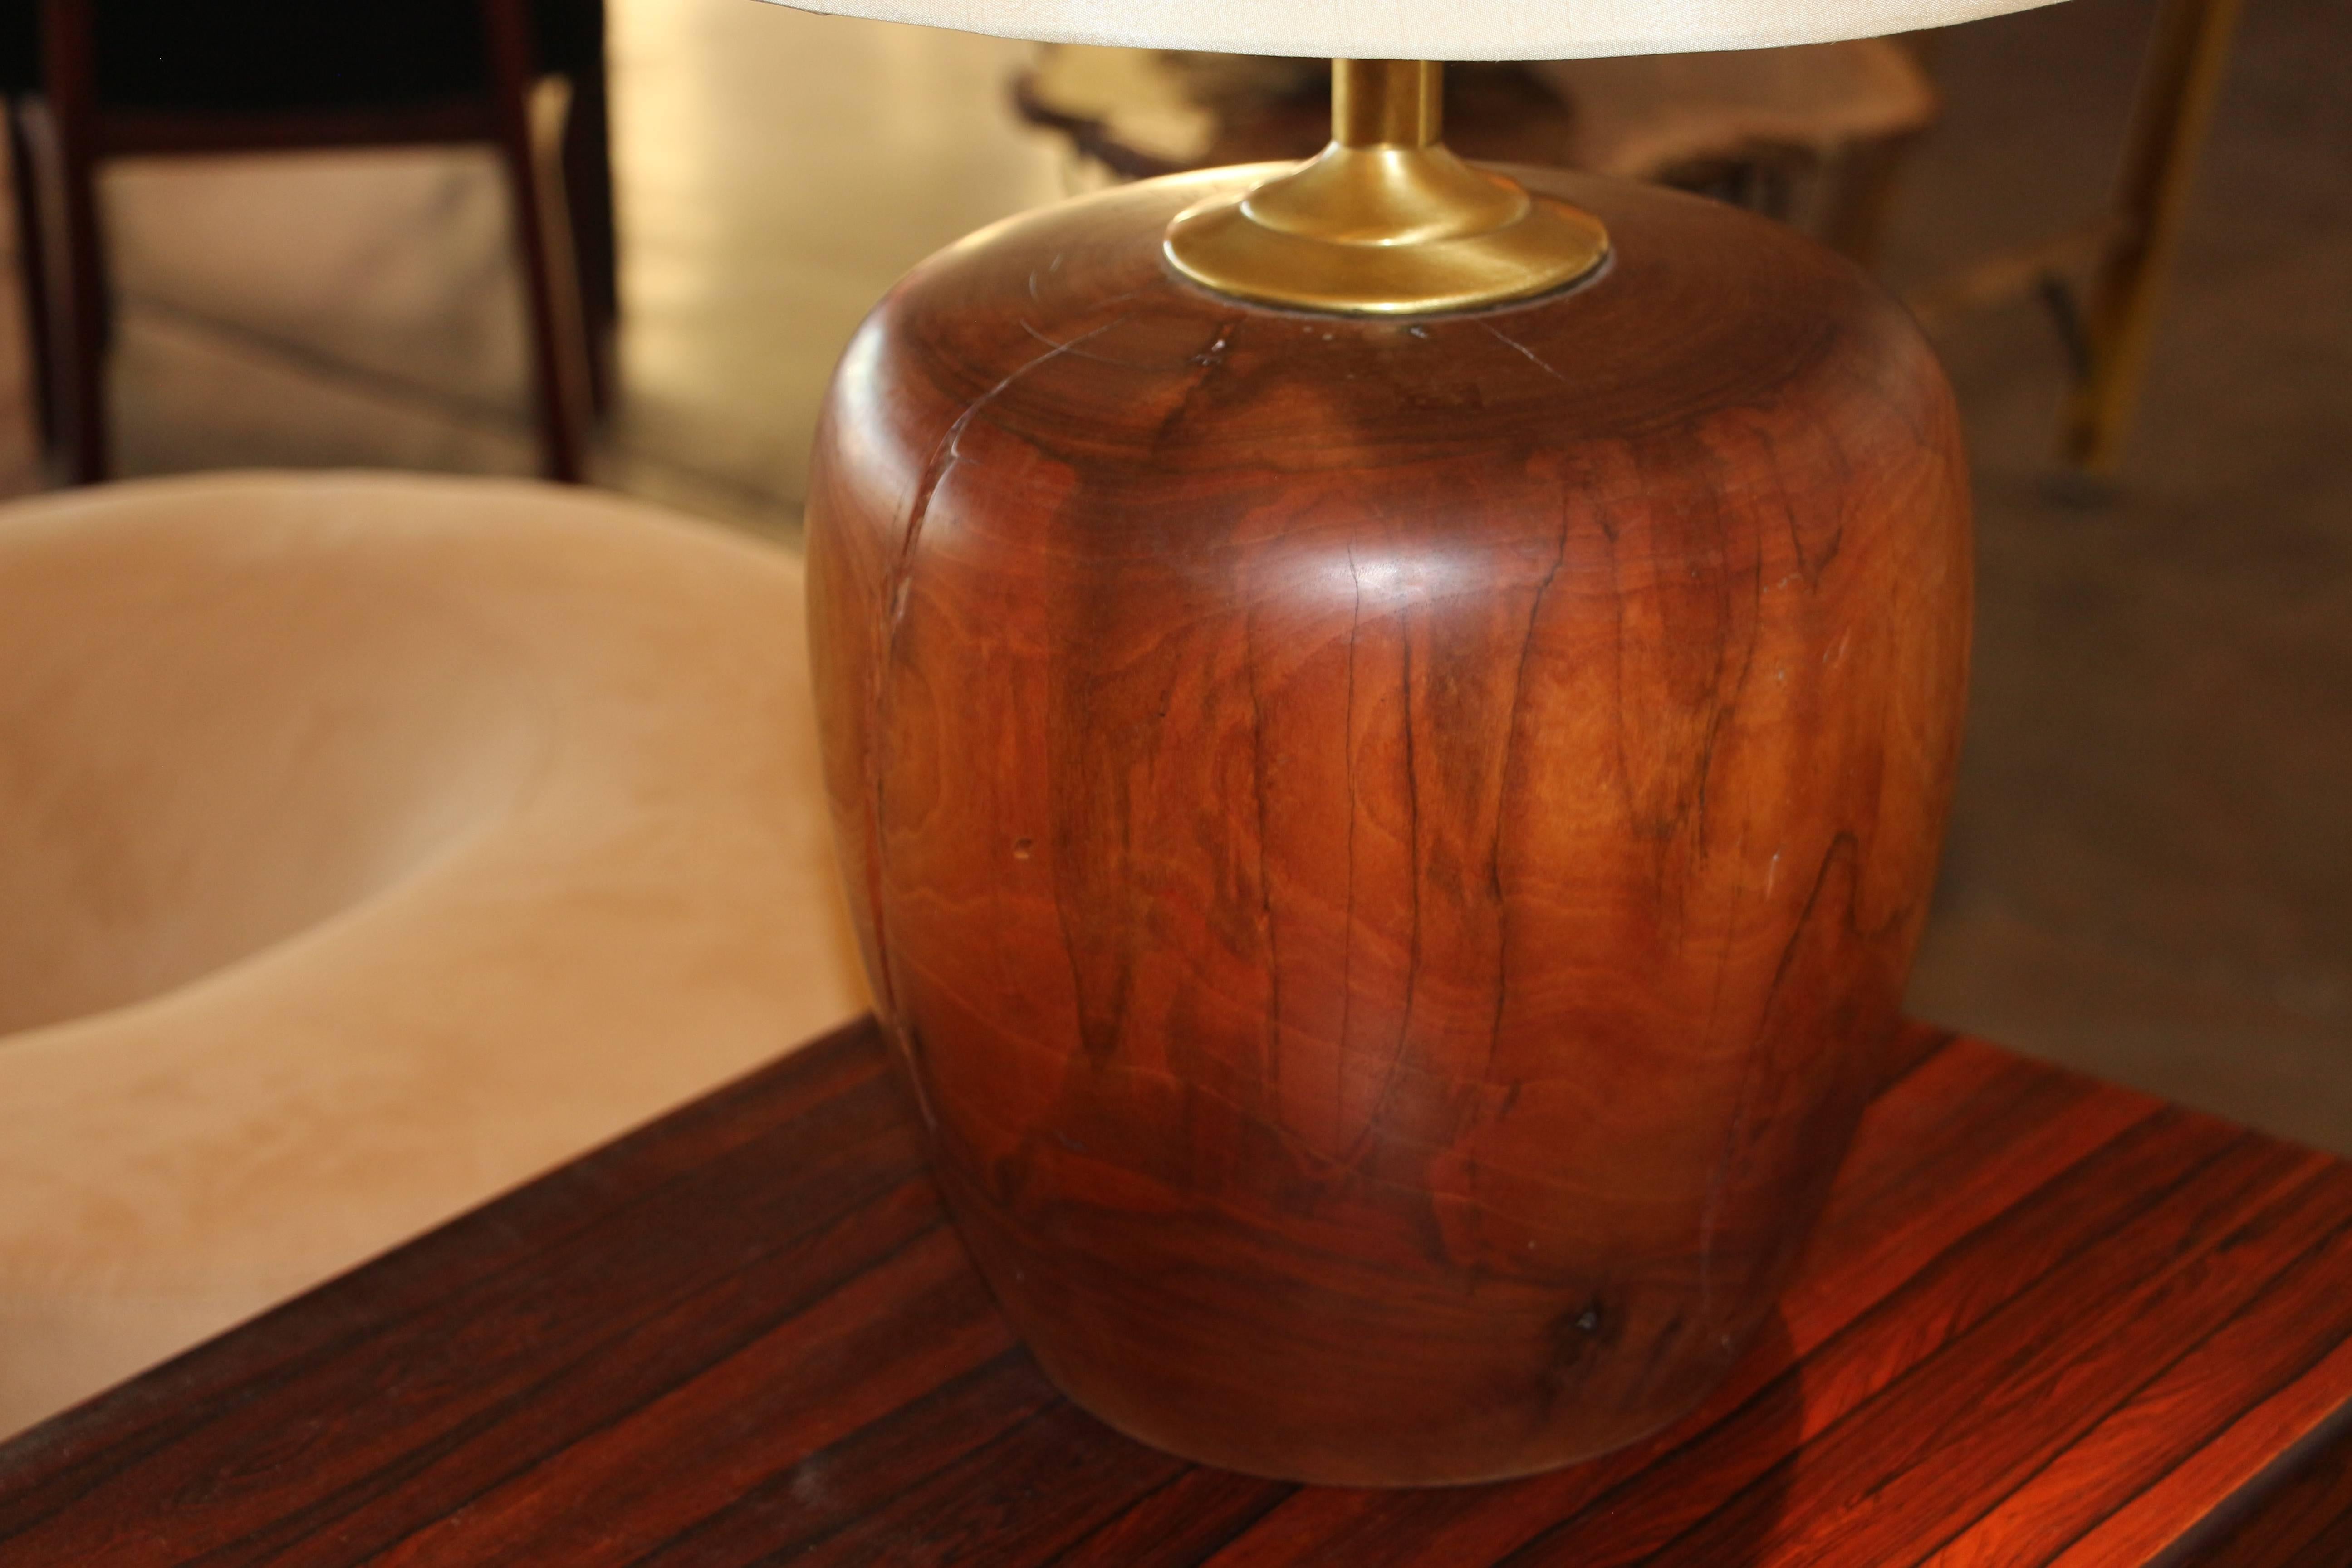 A extremely heavy turned wood base turned into a lamp. Nice patina to the wood and great cracking and character to the lamp. Wood part alone is 11 inches tall and 10 inches in diameter. The cord shows it's age maybe 1960s-1970s.